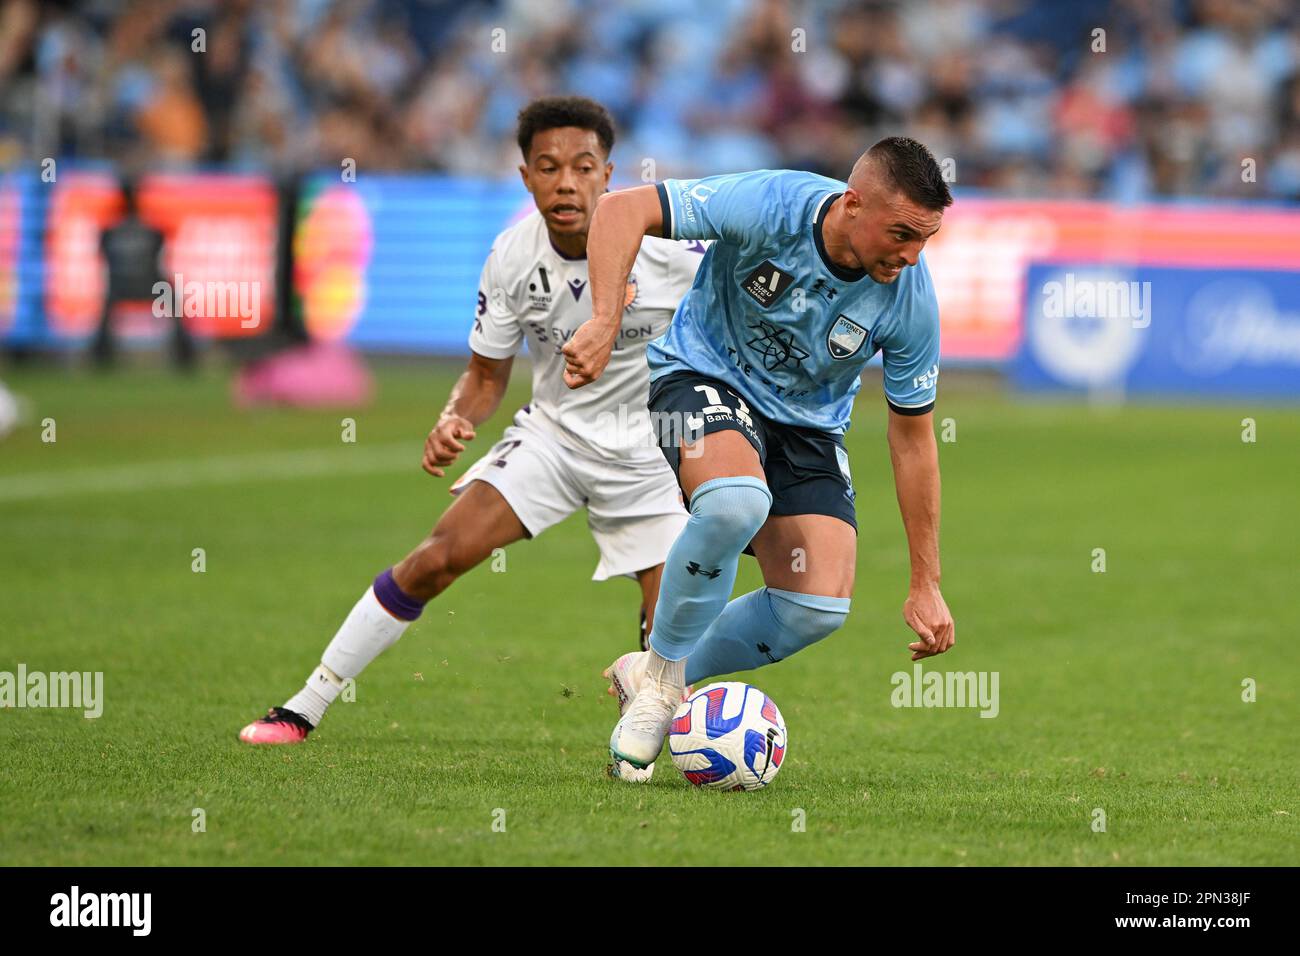 Sydney, Australia. 16th Apr, 2023. Robert Mak (R) of Sydney Football Club team and Antonee Alan Burke-Gilroy (L) of Perth Glory team in action during the 2022-23 Liberty A-League Men's soccer semi-final match between Sydney FC and Western United held at the Allianz Stadium. final score; Sydney football club 3:1 Perth glory Credit: SOPA Images Limited/Alamy Live News Stock Photo